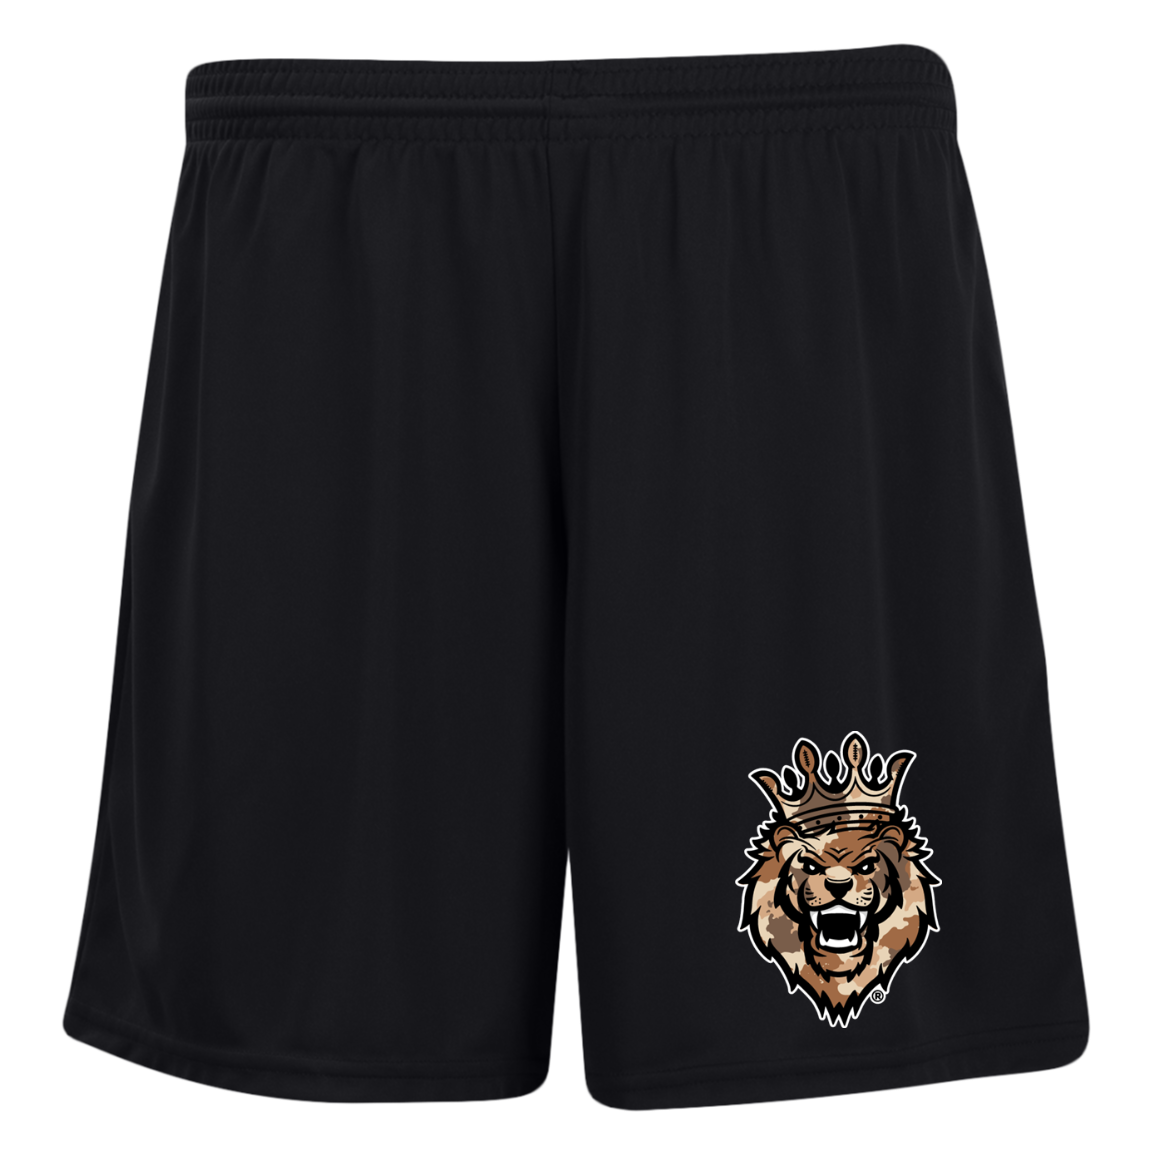 Respect The Roar® Brown Ladies' 7 inch Inseam Training Shorts